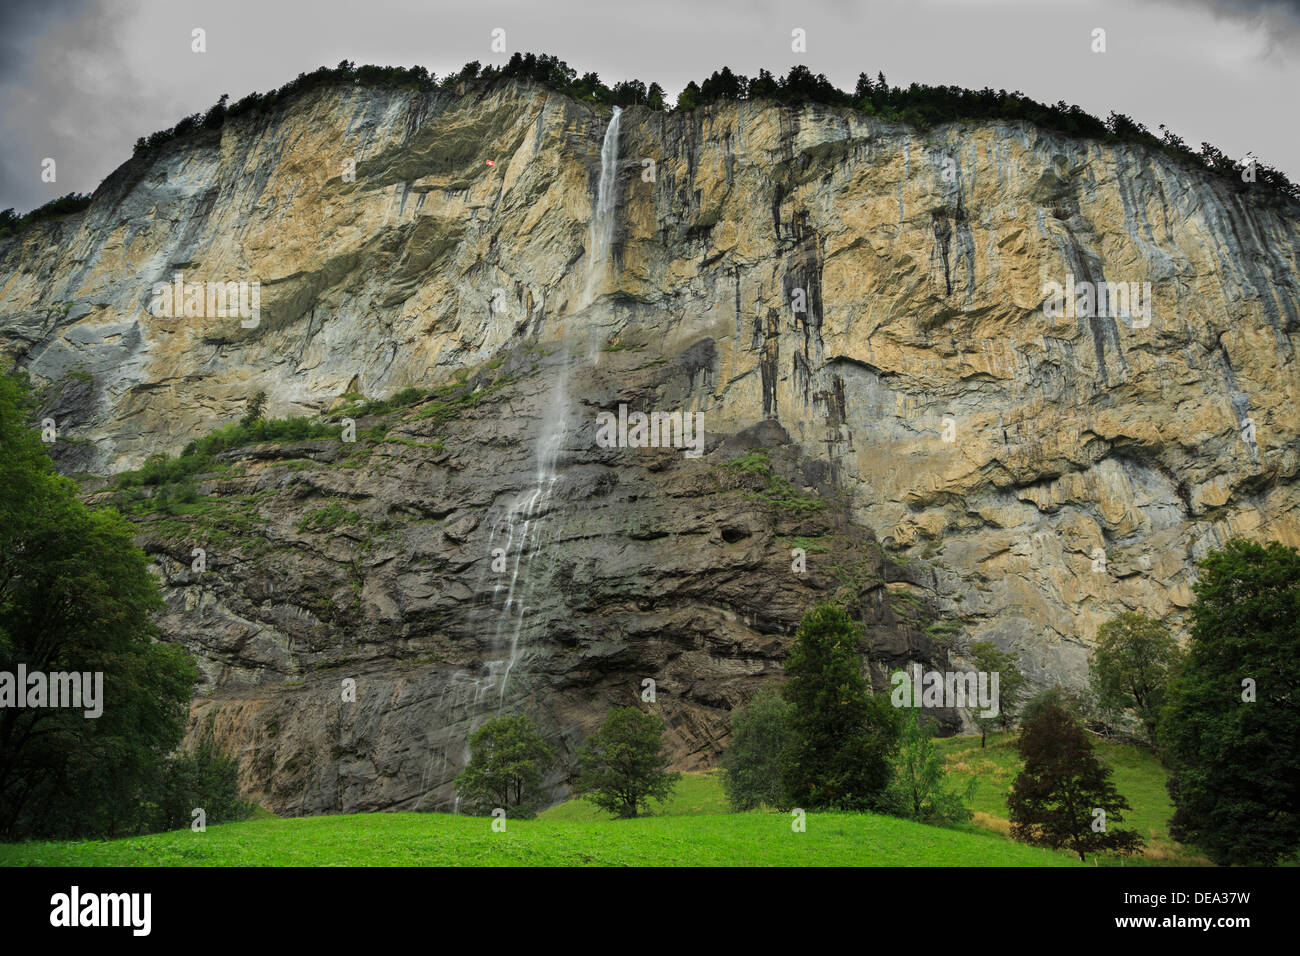 A cliff face and waterfall in Lauterbrunnen, Switzerland. The grey storm clouds give the photo a special feeling. Stock Photo